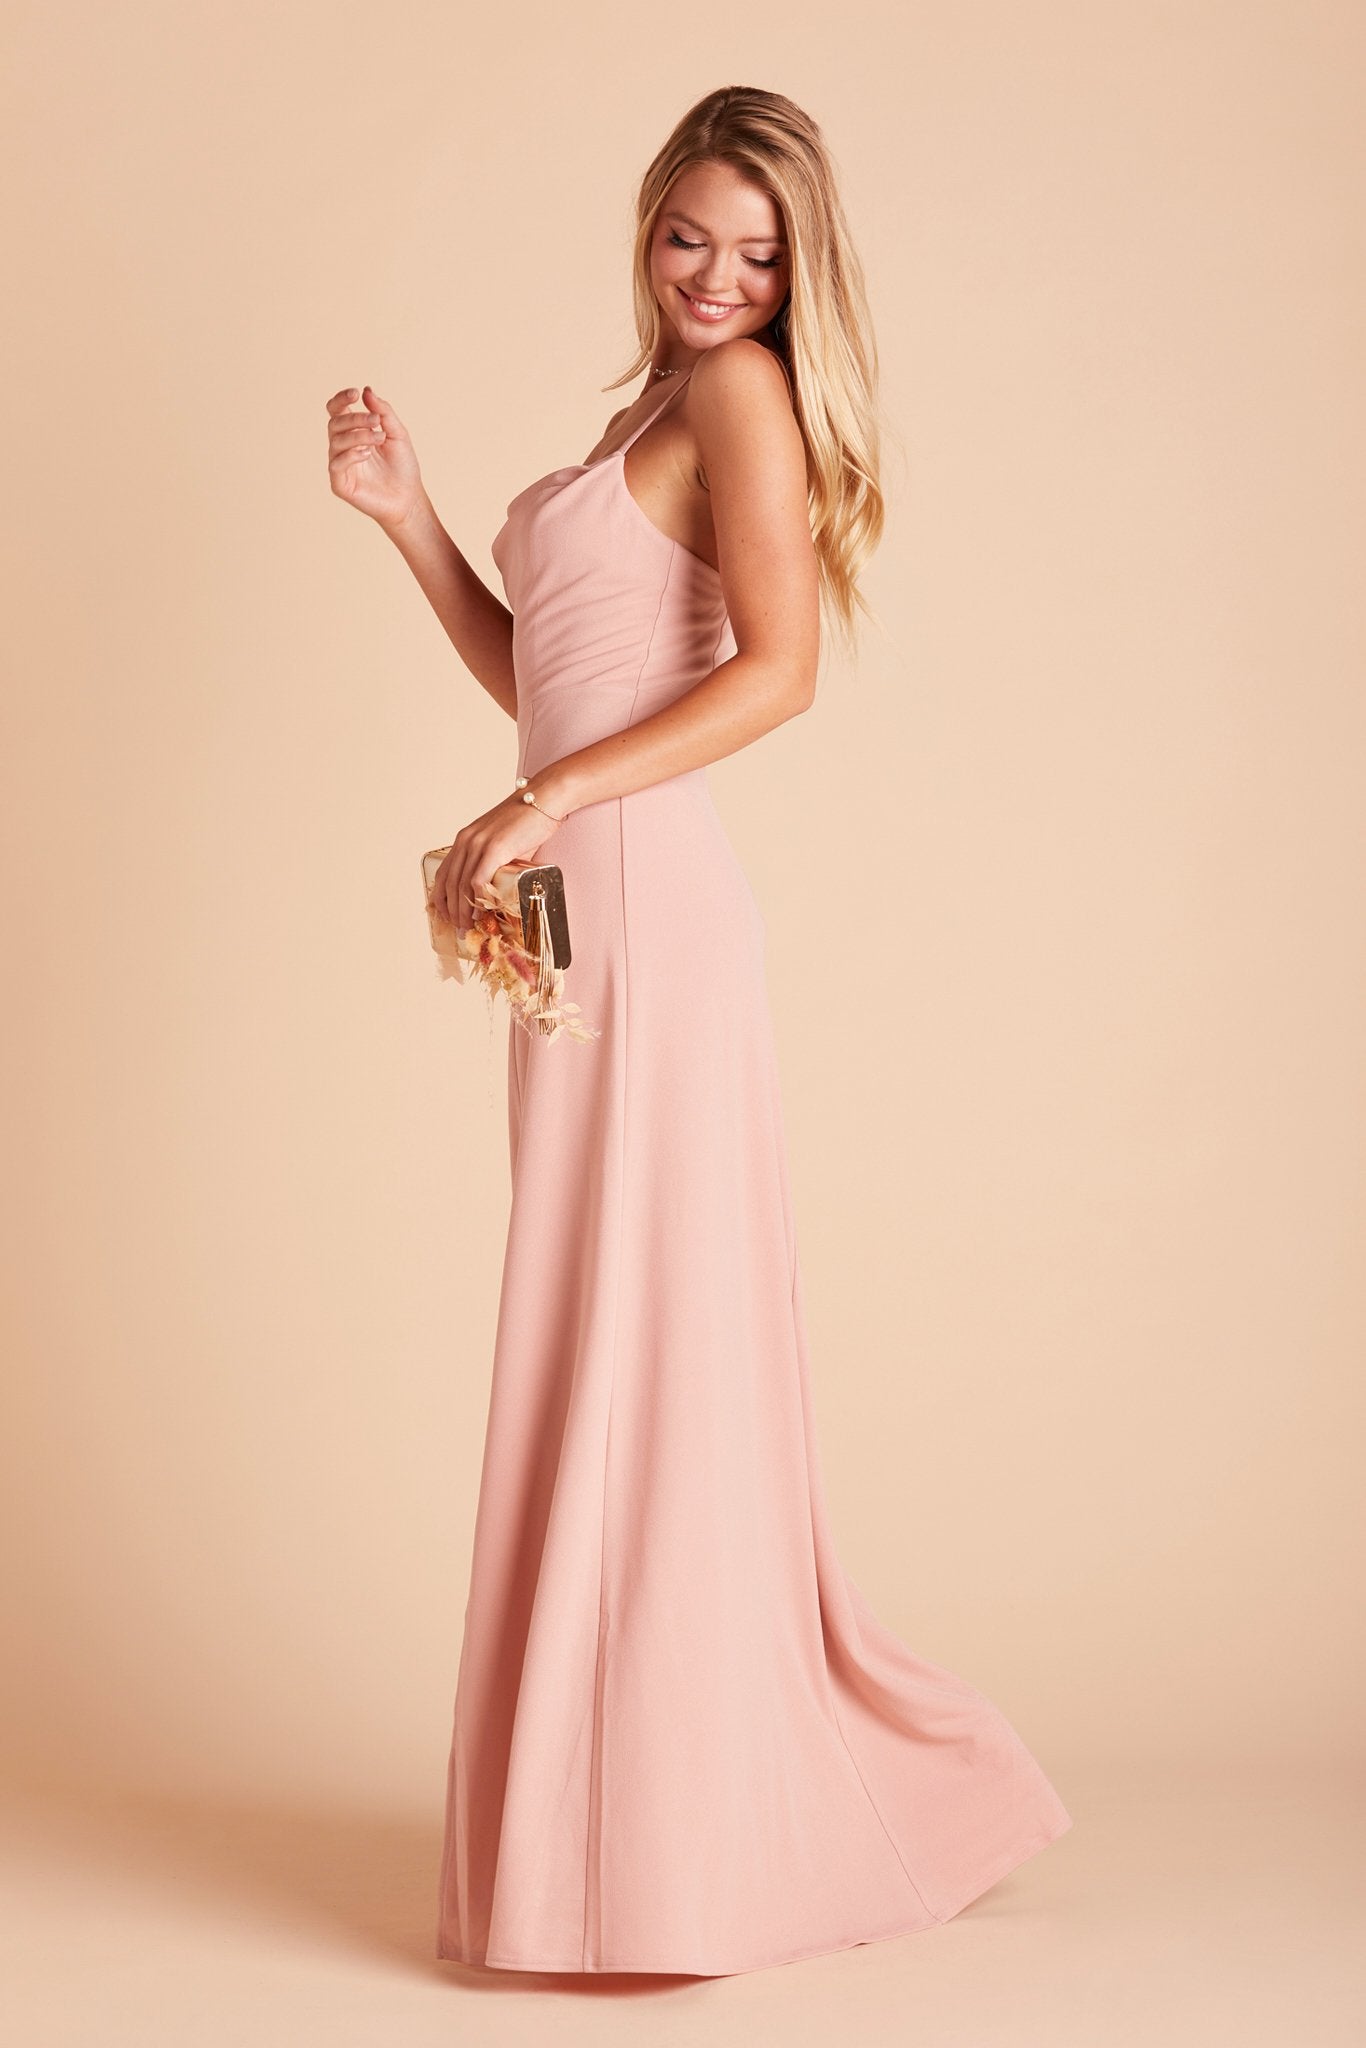 Side view of the Ash Bridesmaid Dress in dusty rose crepe shows a fitted bust and waist with a delicate flowing skirt.